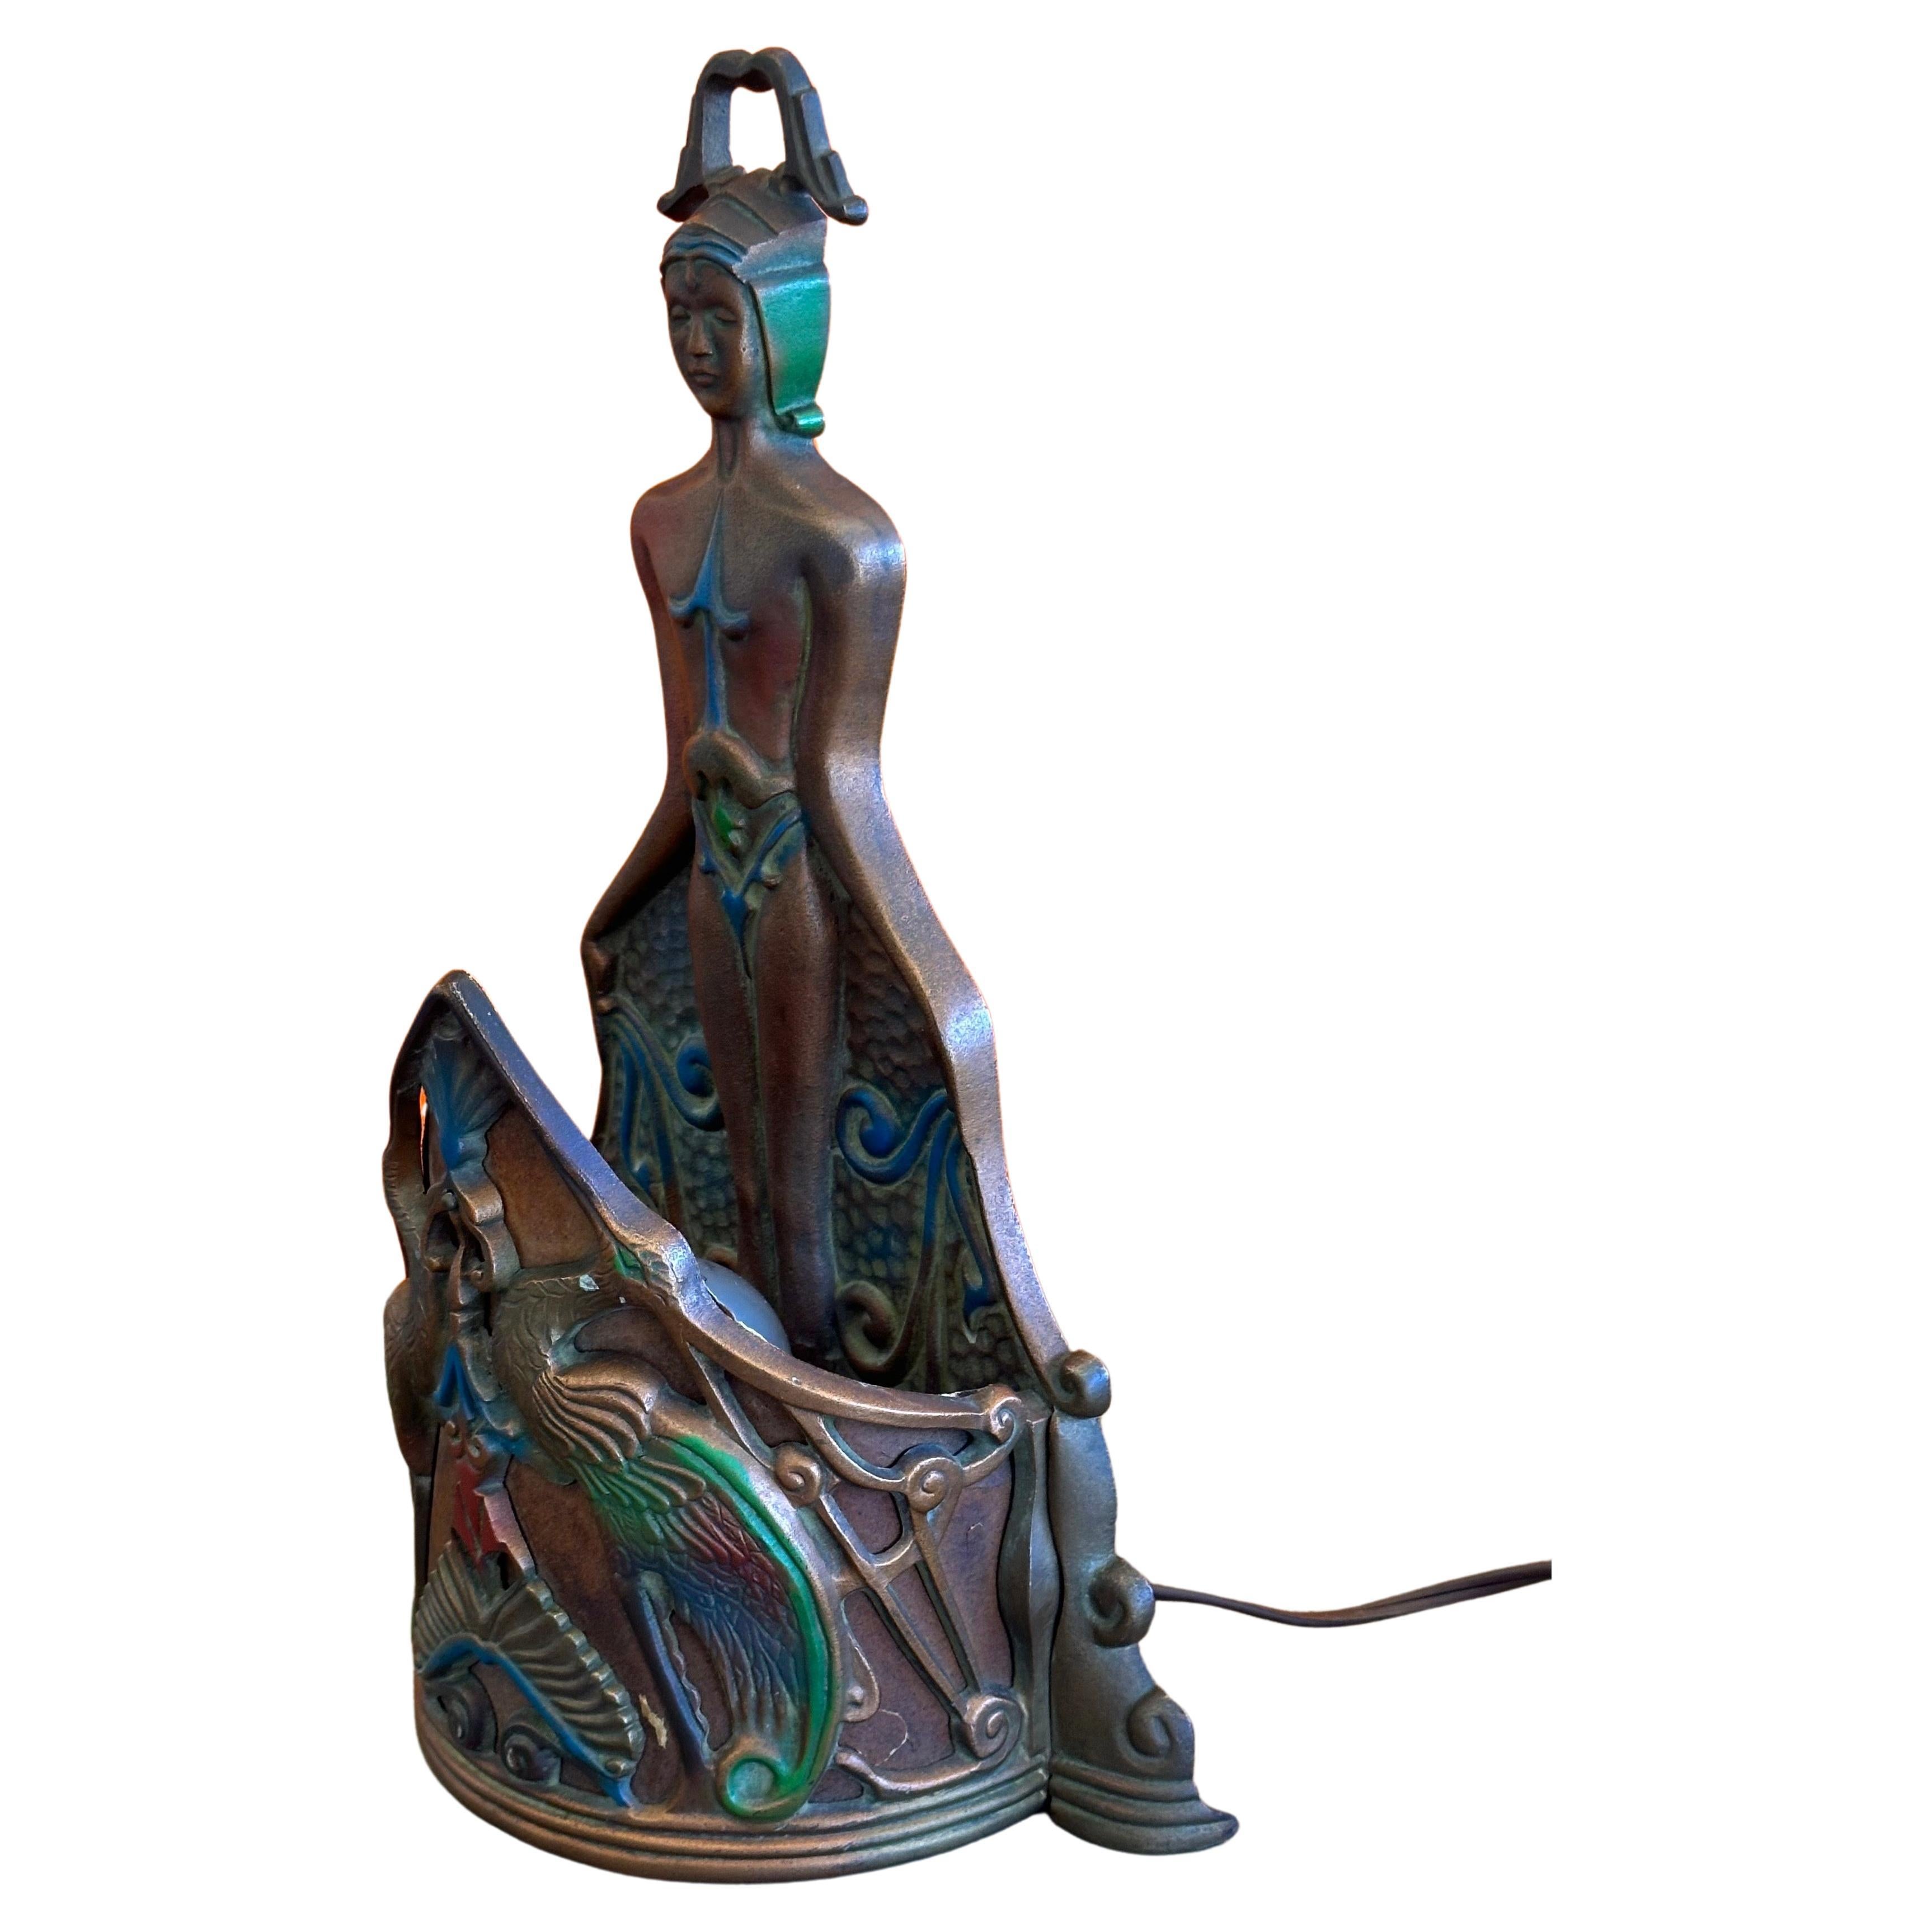 American Antique Art Deco Egyptian Revival Style Bronze Table Lamp by Reiser Lamp Co. For Sale